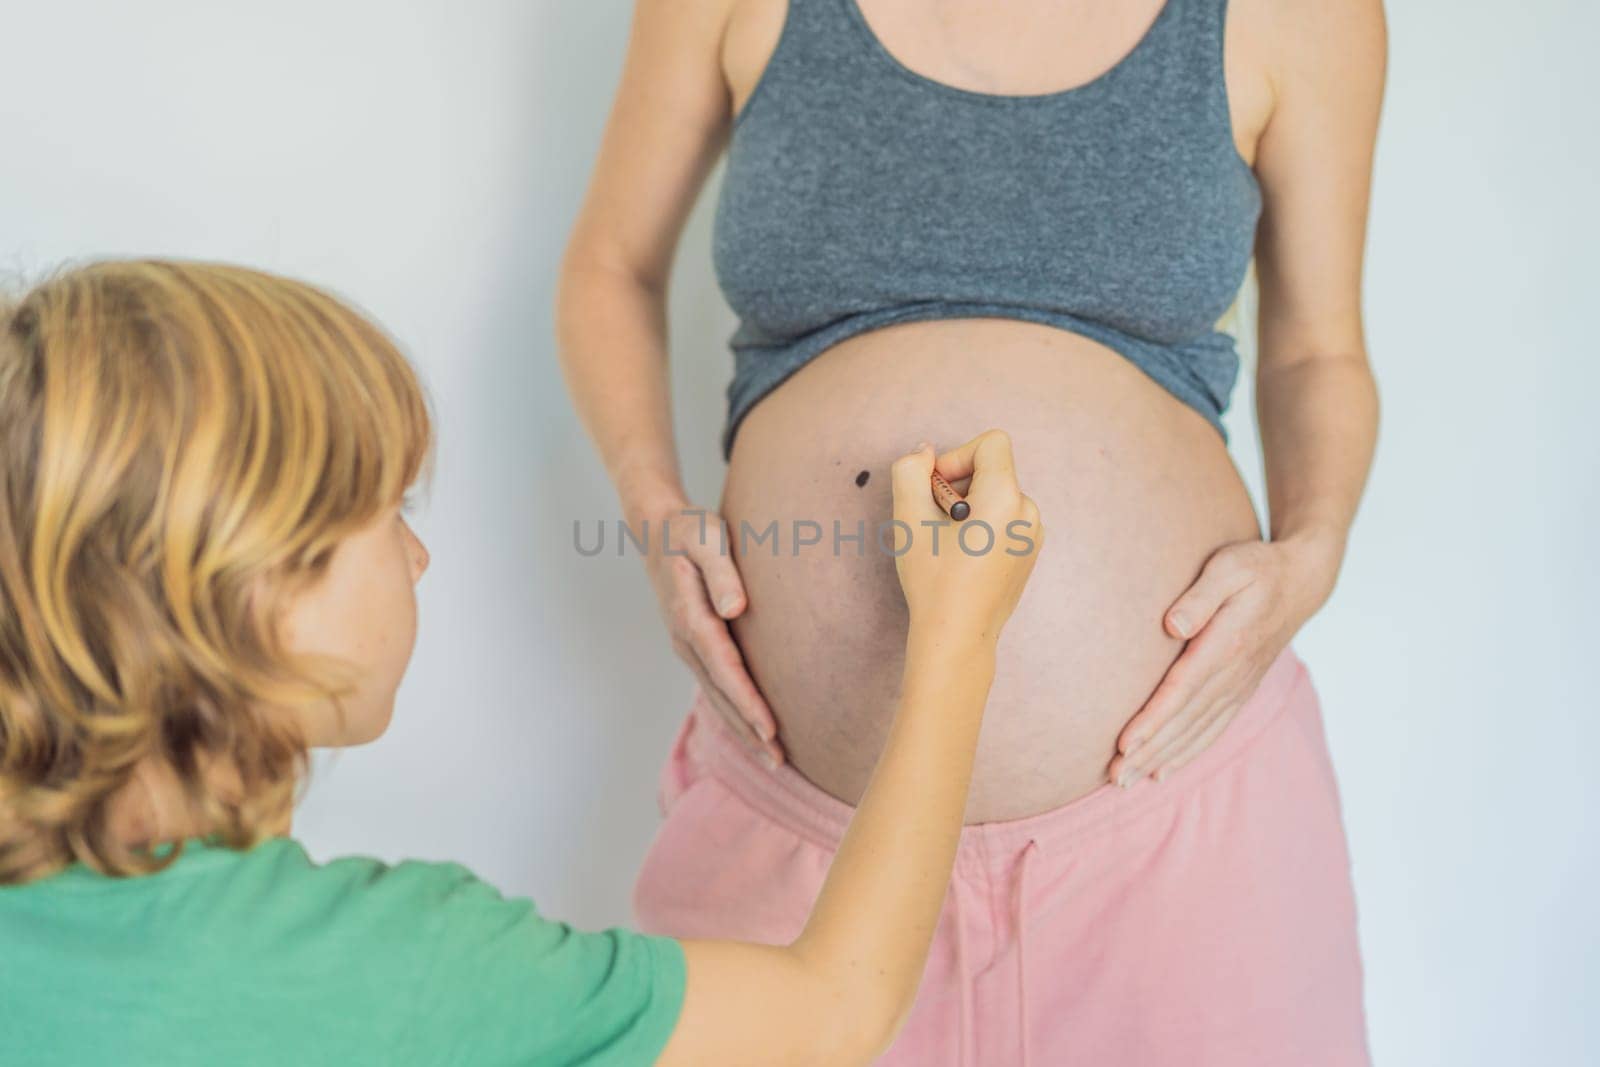 Adorable moment as a son adds a touch of joy to his mother's pregnancy, playfully drawing a funny face on her baby bump, creating cherished memories by galitskaya